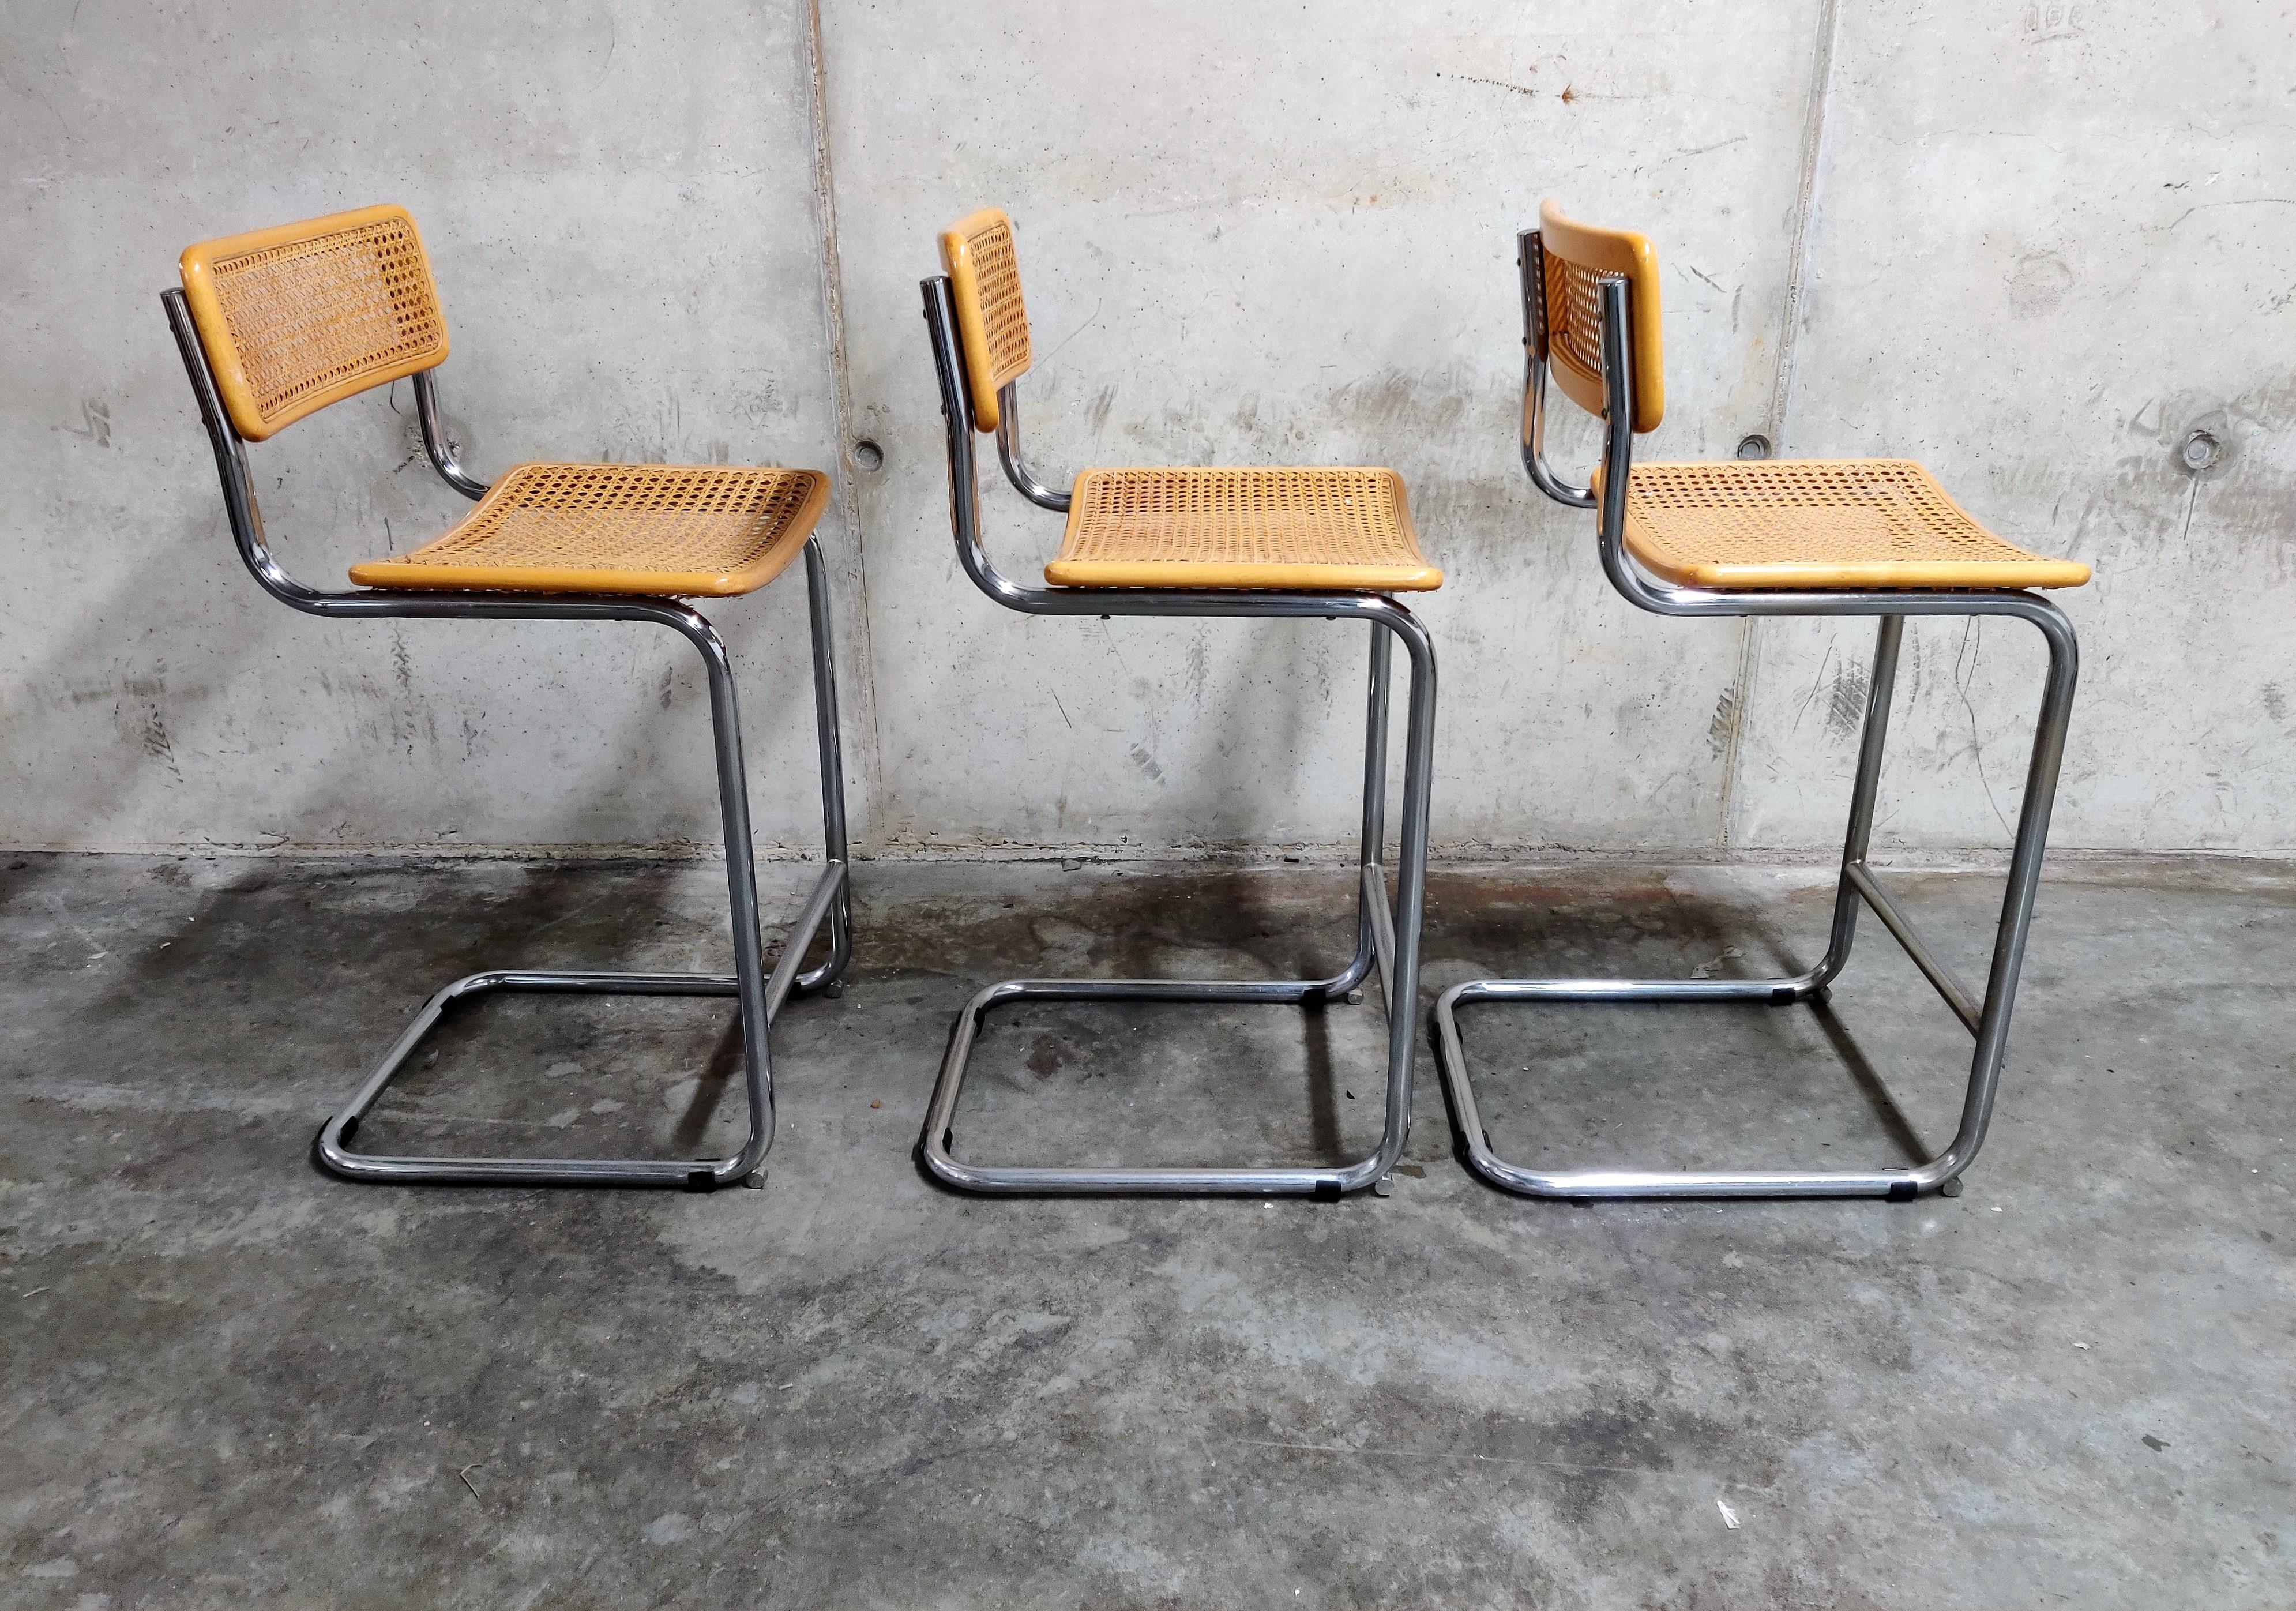 Set of 3 Marcel Breuer Bauhaus design bar stools produced by Cidue (one of the stools still has the original label).

Tubular chrome frame with cane seats.

All in very good condition.

Dimensions:
Height 93cm/36.61